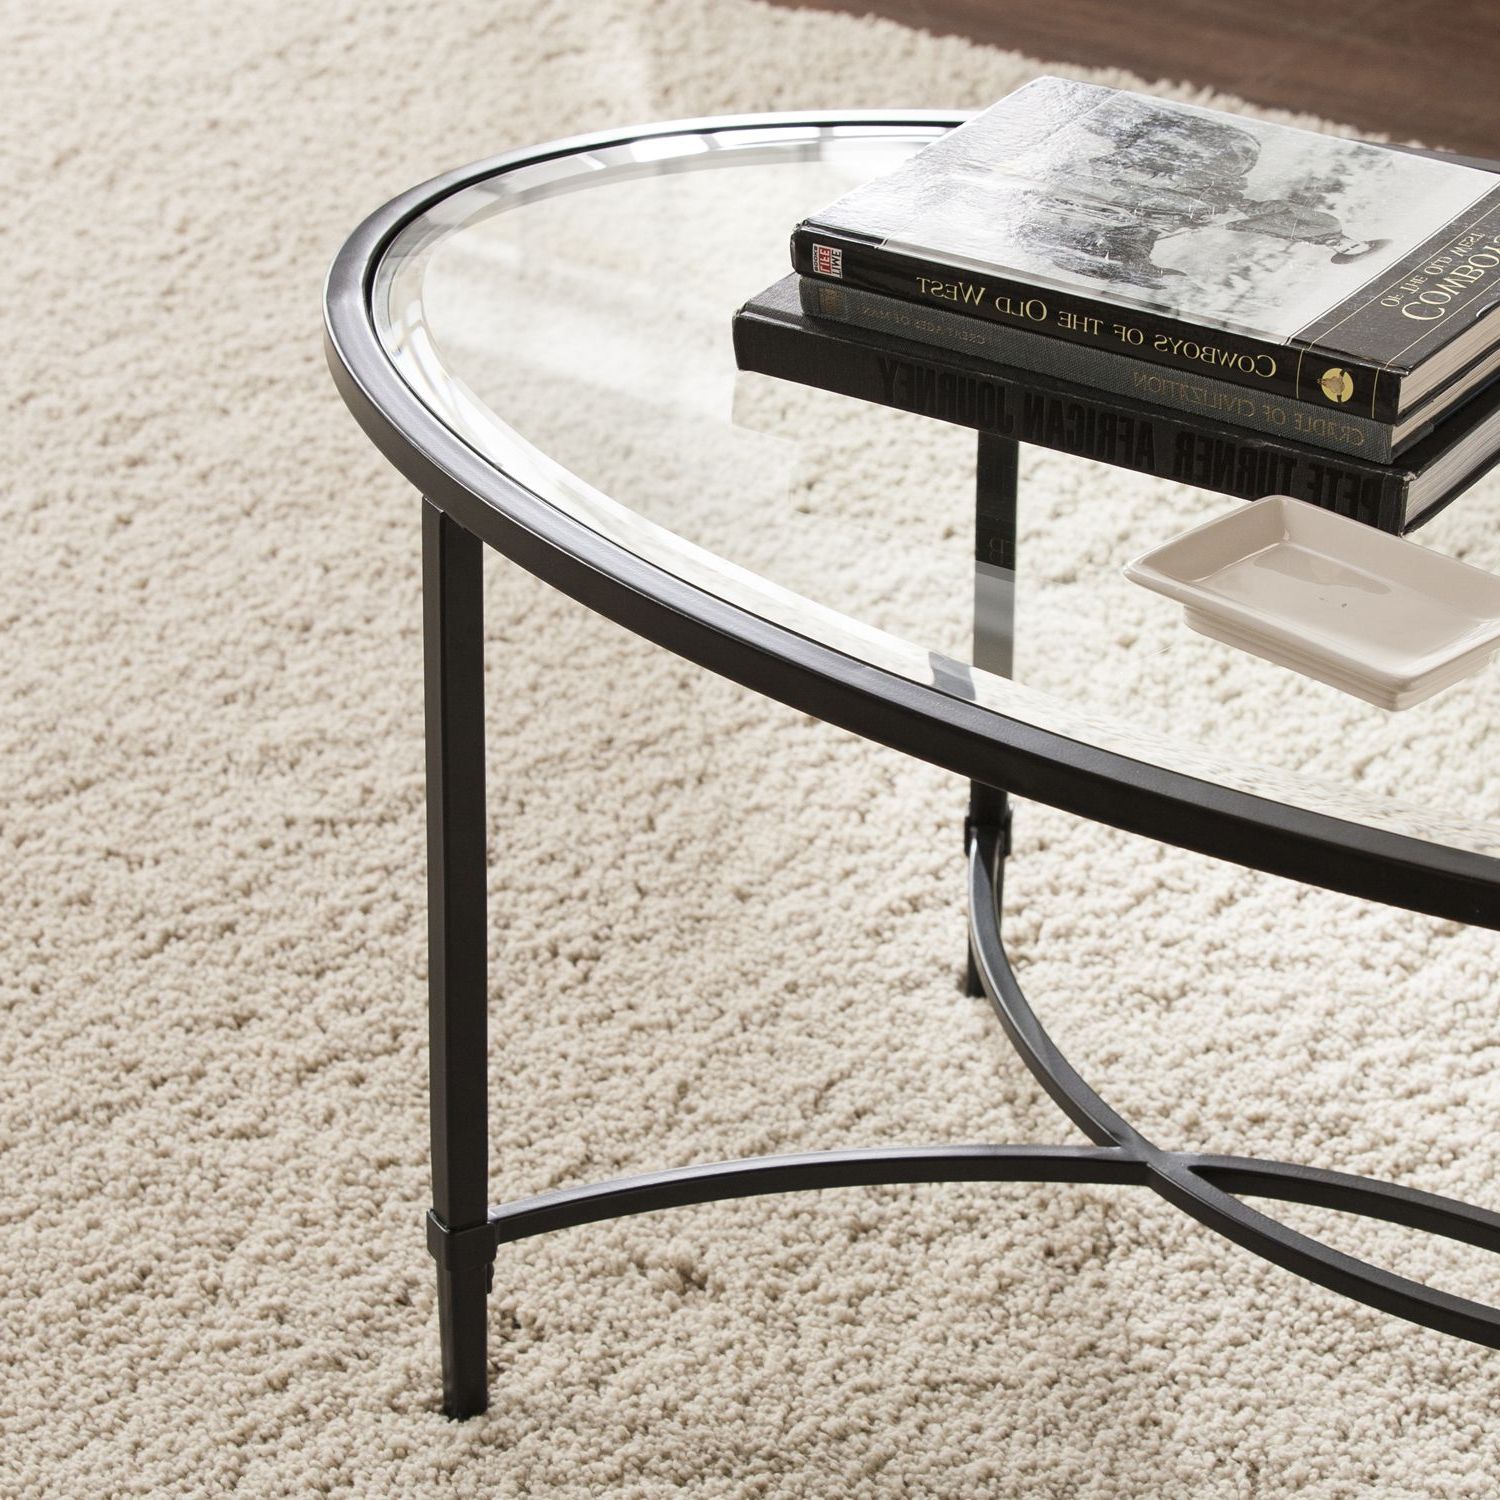 Southern Enterprises Quinton Painted Black Coffee Table Ck3600 | Glass Regarding Southern Enterprises Larksmill Coffee Tables (Gallery 10 of 20)